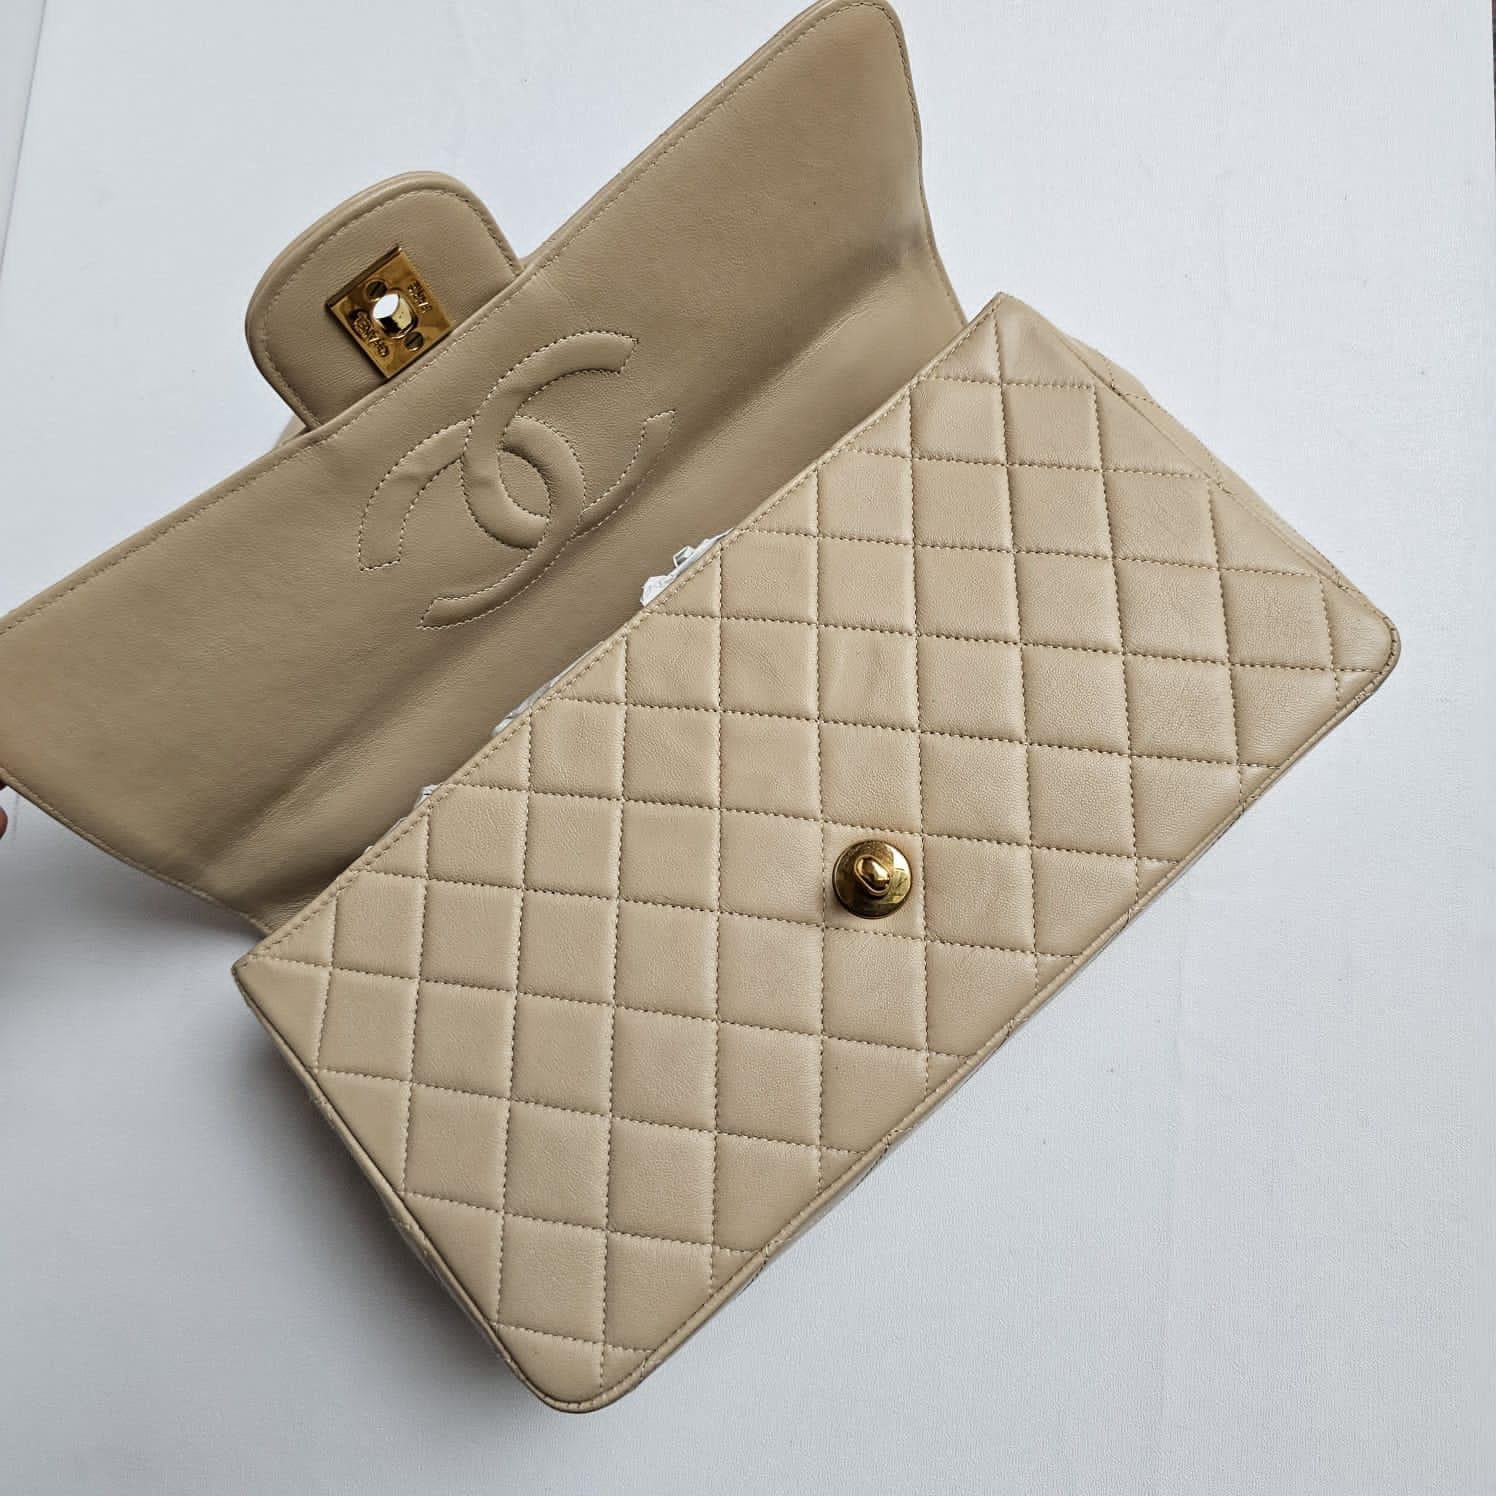 Rare Vintage 1990s Beige Lambskin Quilted Twin Bag For Sale 16